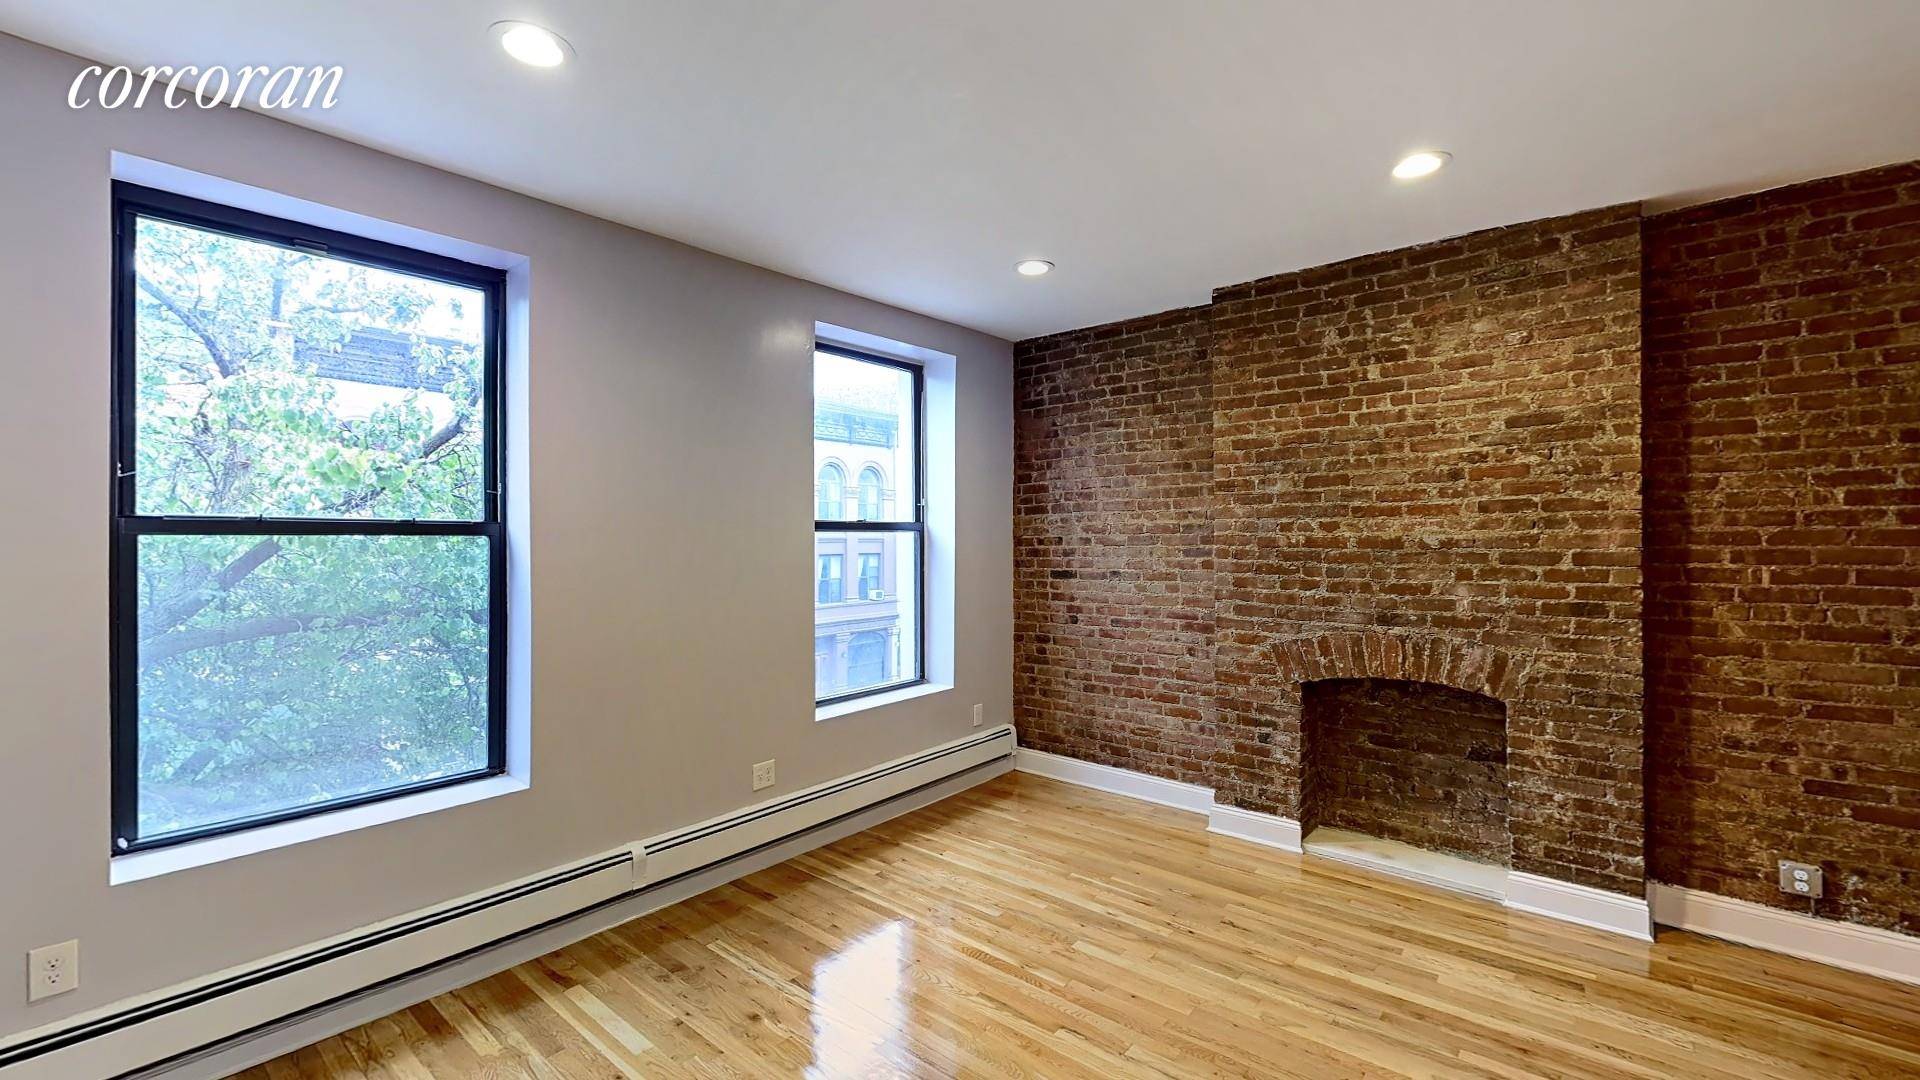 Now is the perfect time to move into an amazing newly renovated townhouse in Central Harlem.